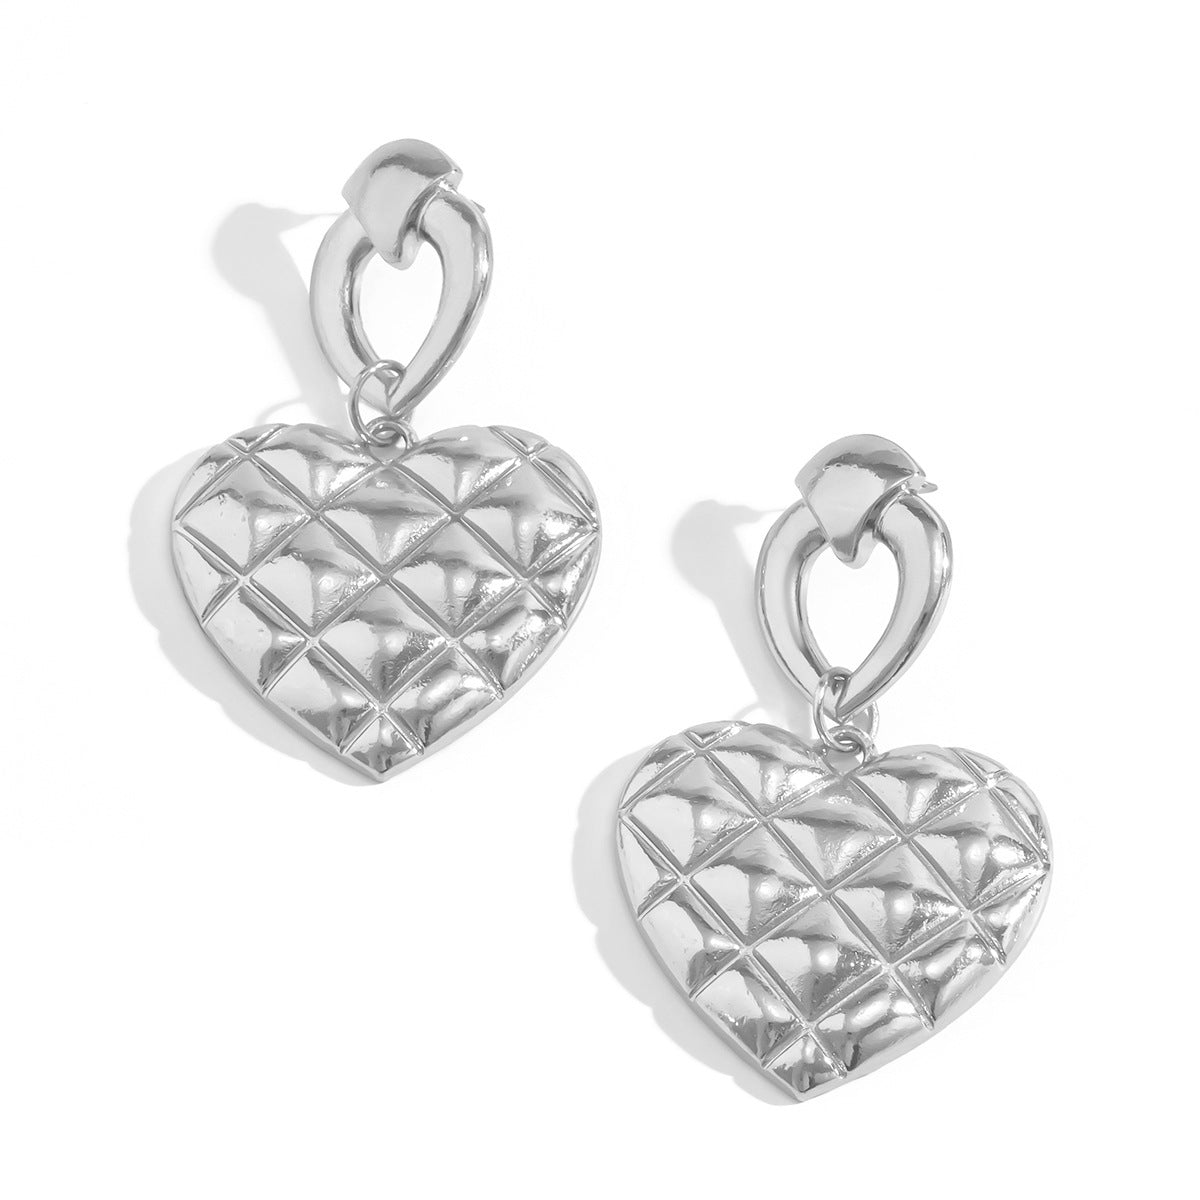 Fashionable Vienna Verve Alloy Earrings with Metal Needles and Simple Three-dimensional Heart-shaped Design